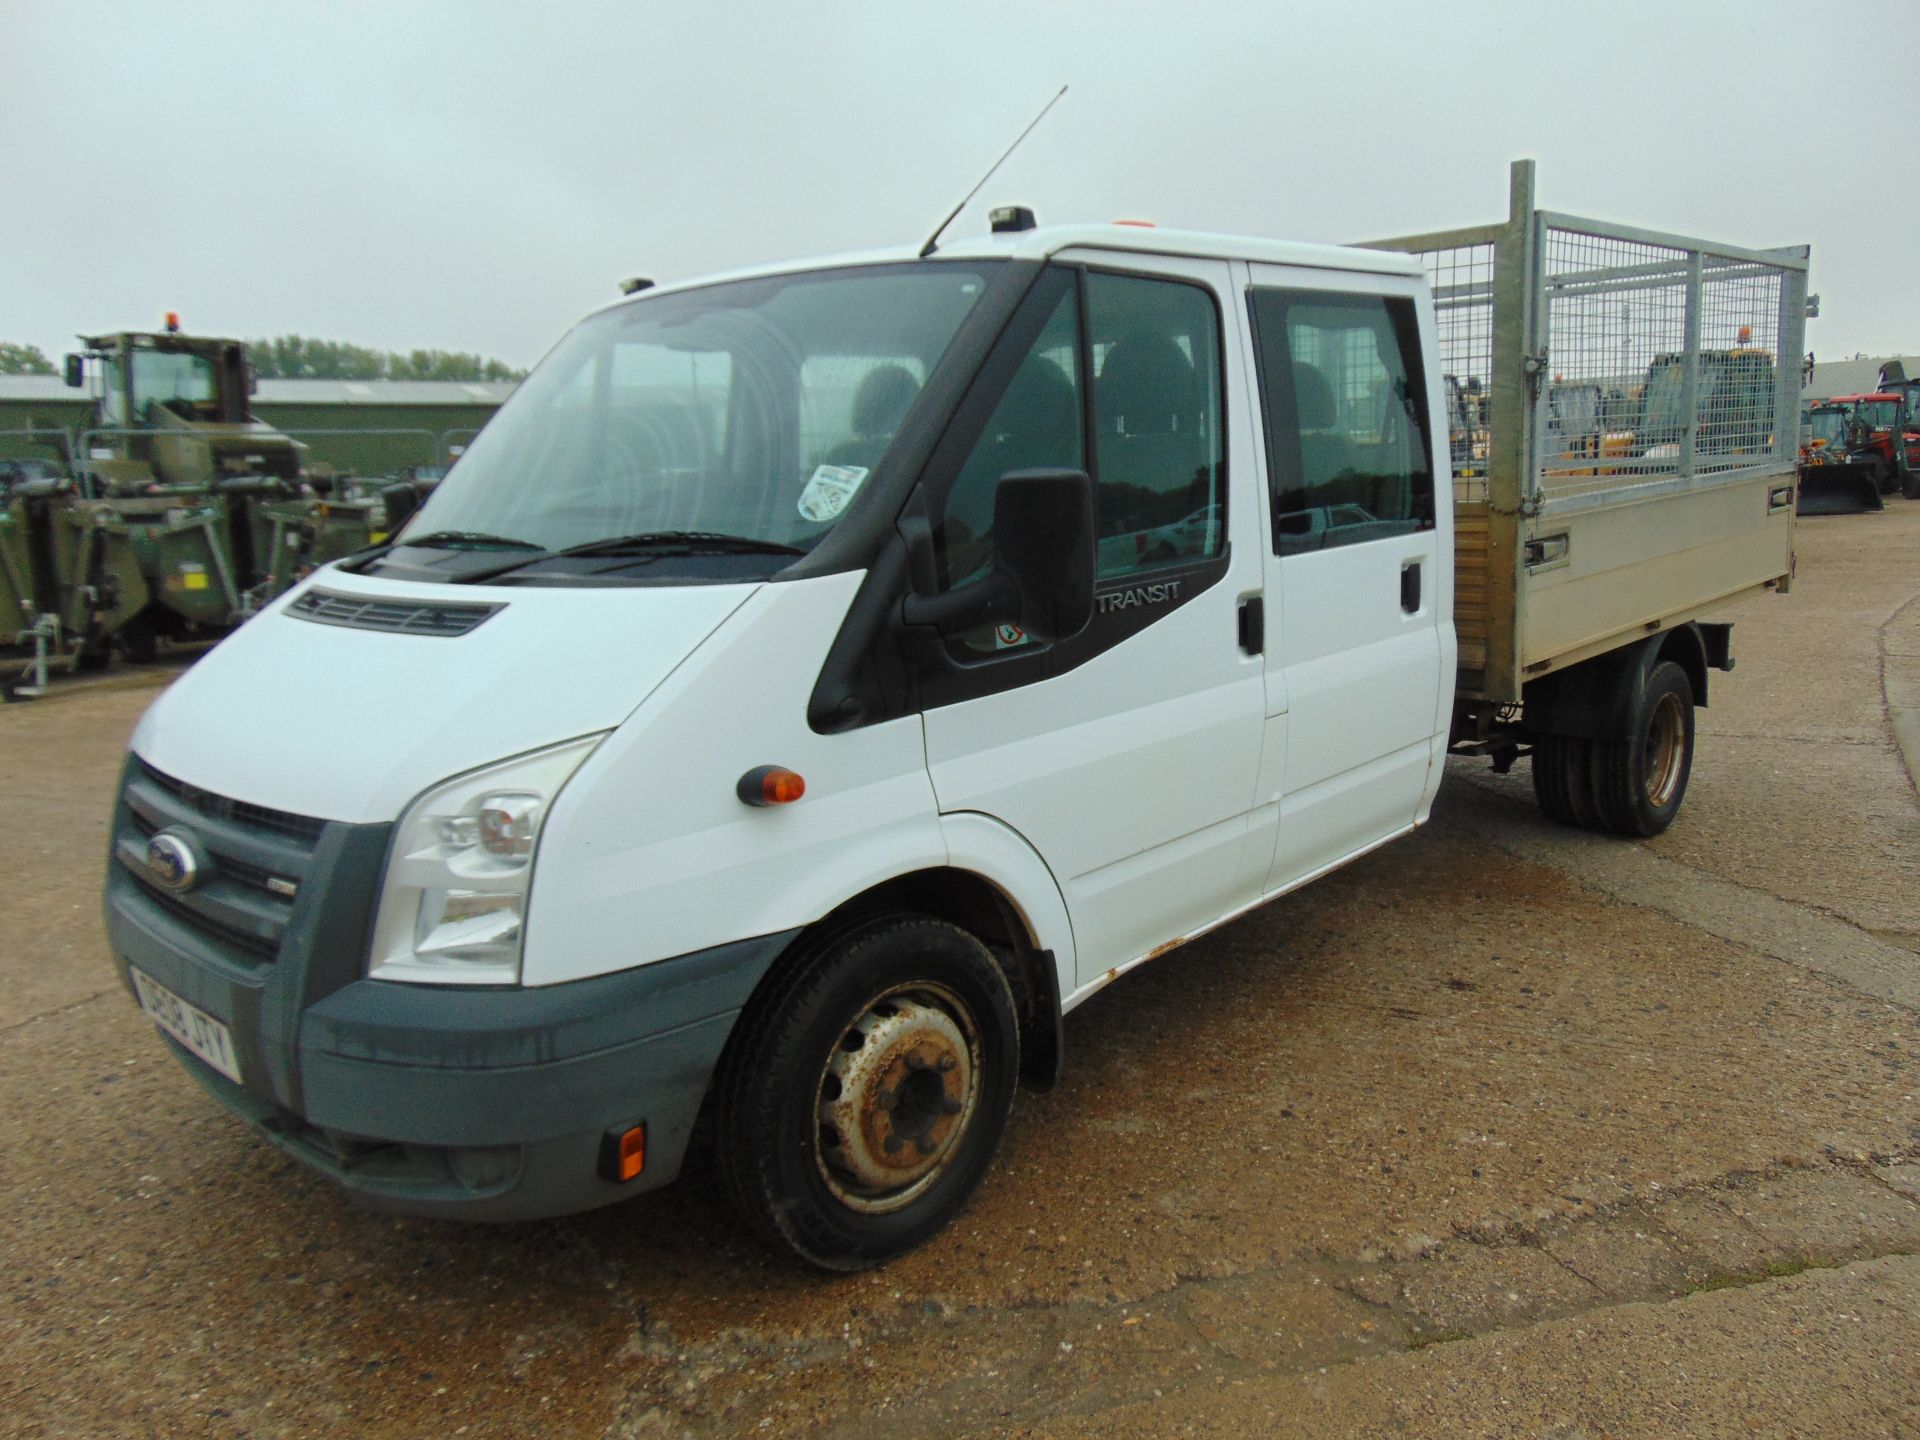 Ford Transit 115 T350 Crew Cab Flat Bed Tipper - Image 4 of 16